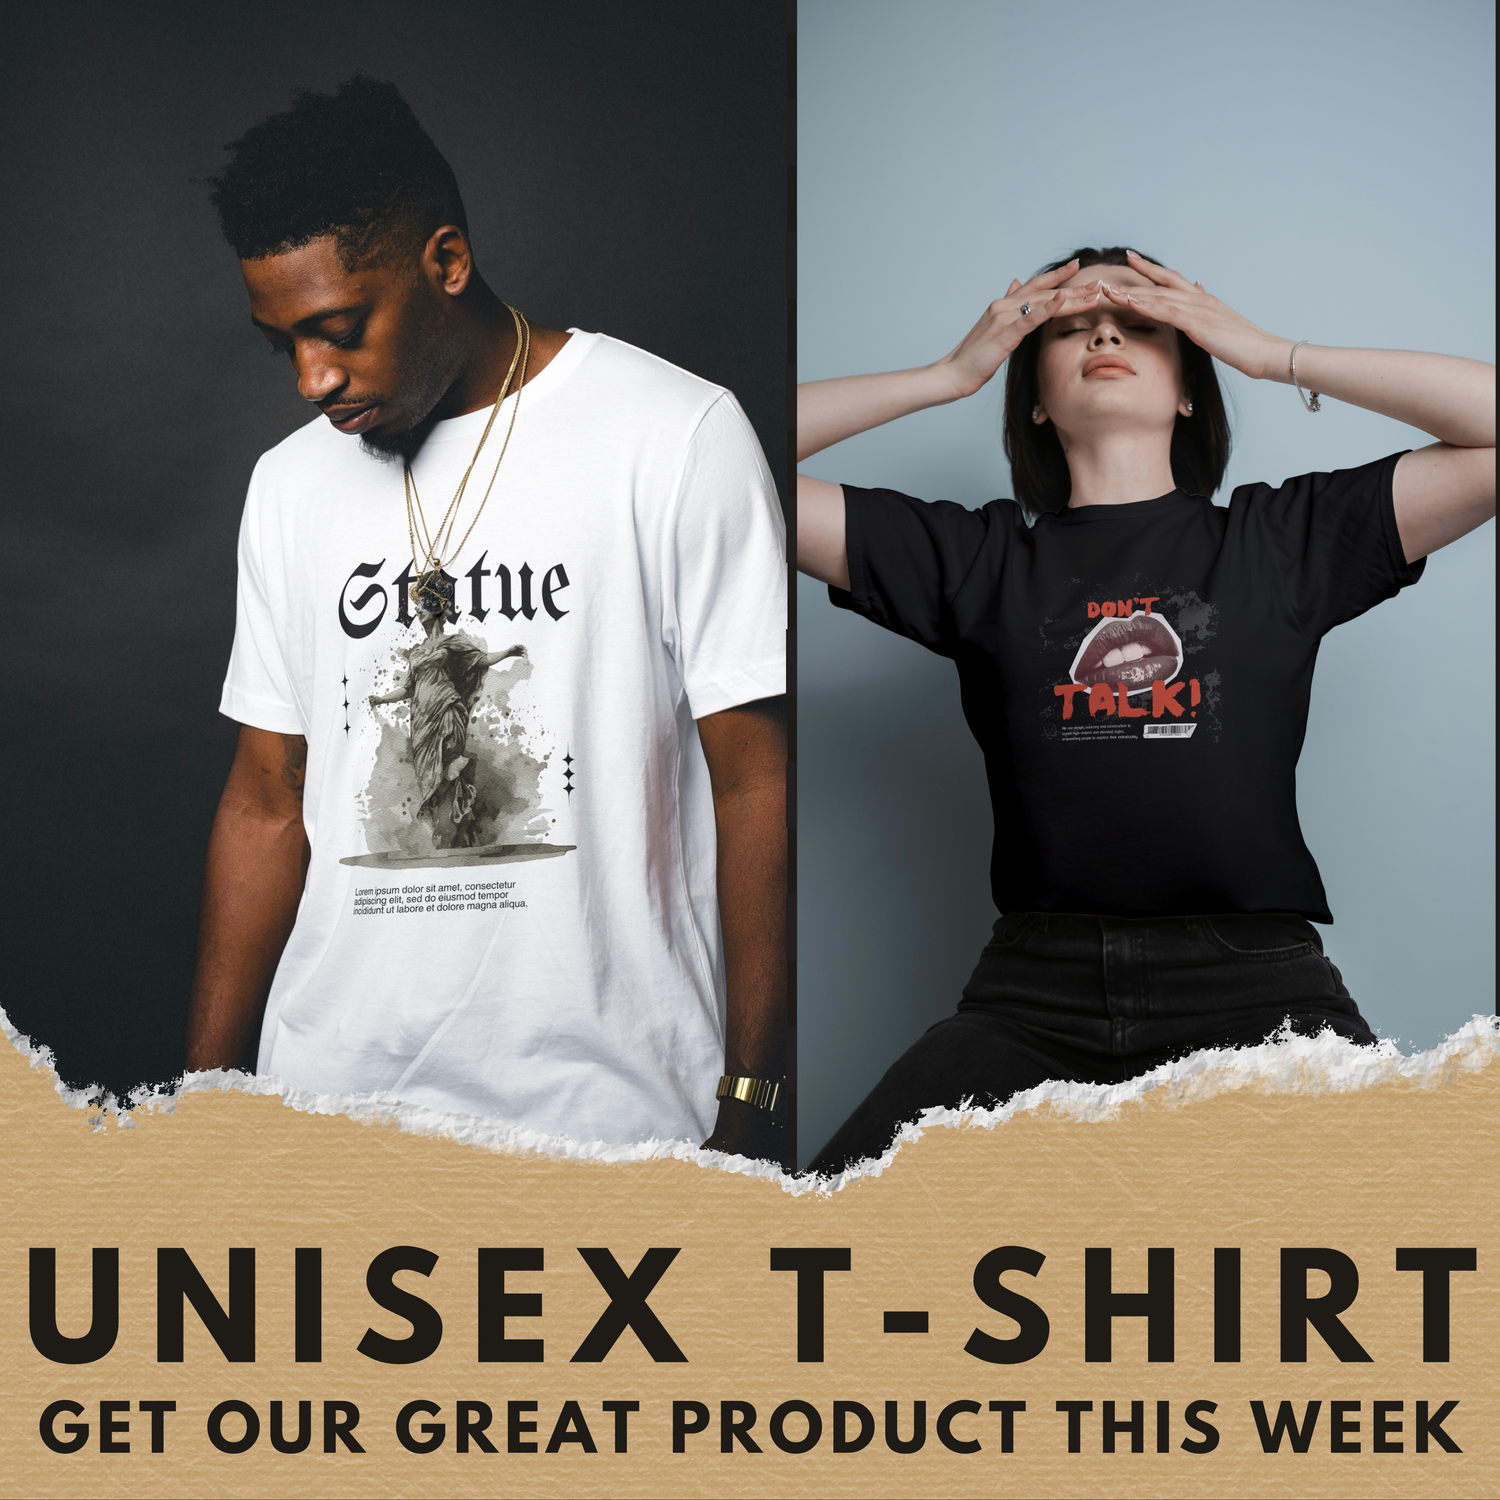 Unisex T-shirt collection